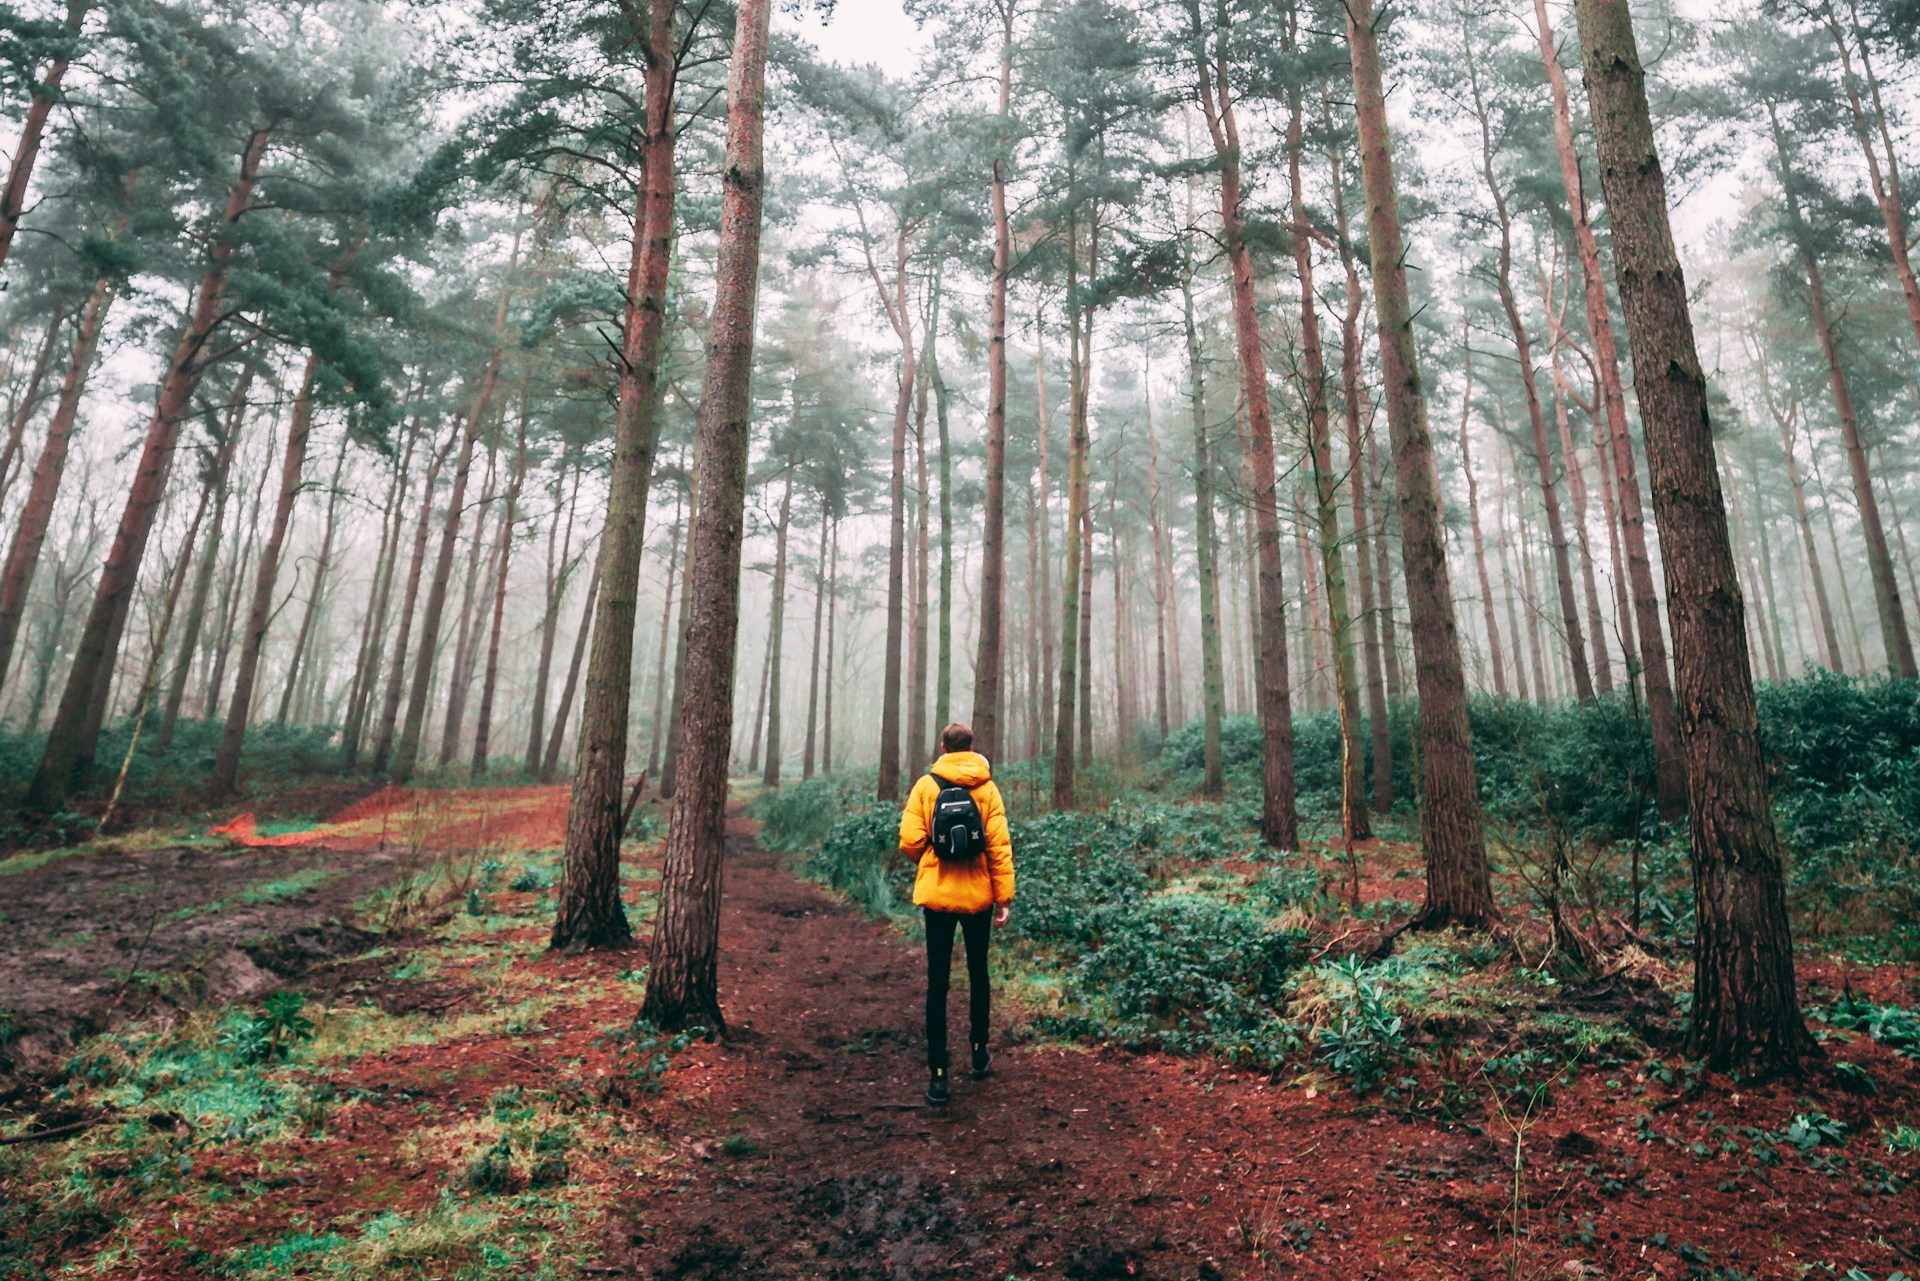 Man wearing yellow jacket and backpack hiking or rucking in forest or woods with tall trees